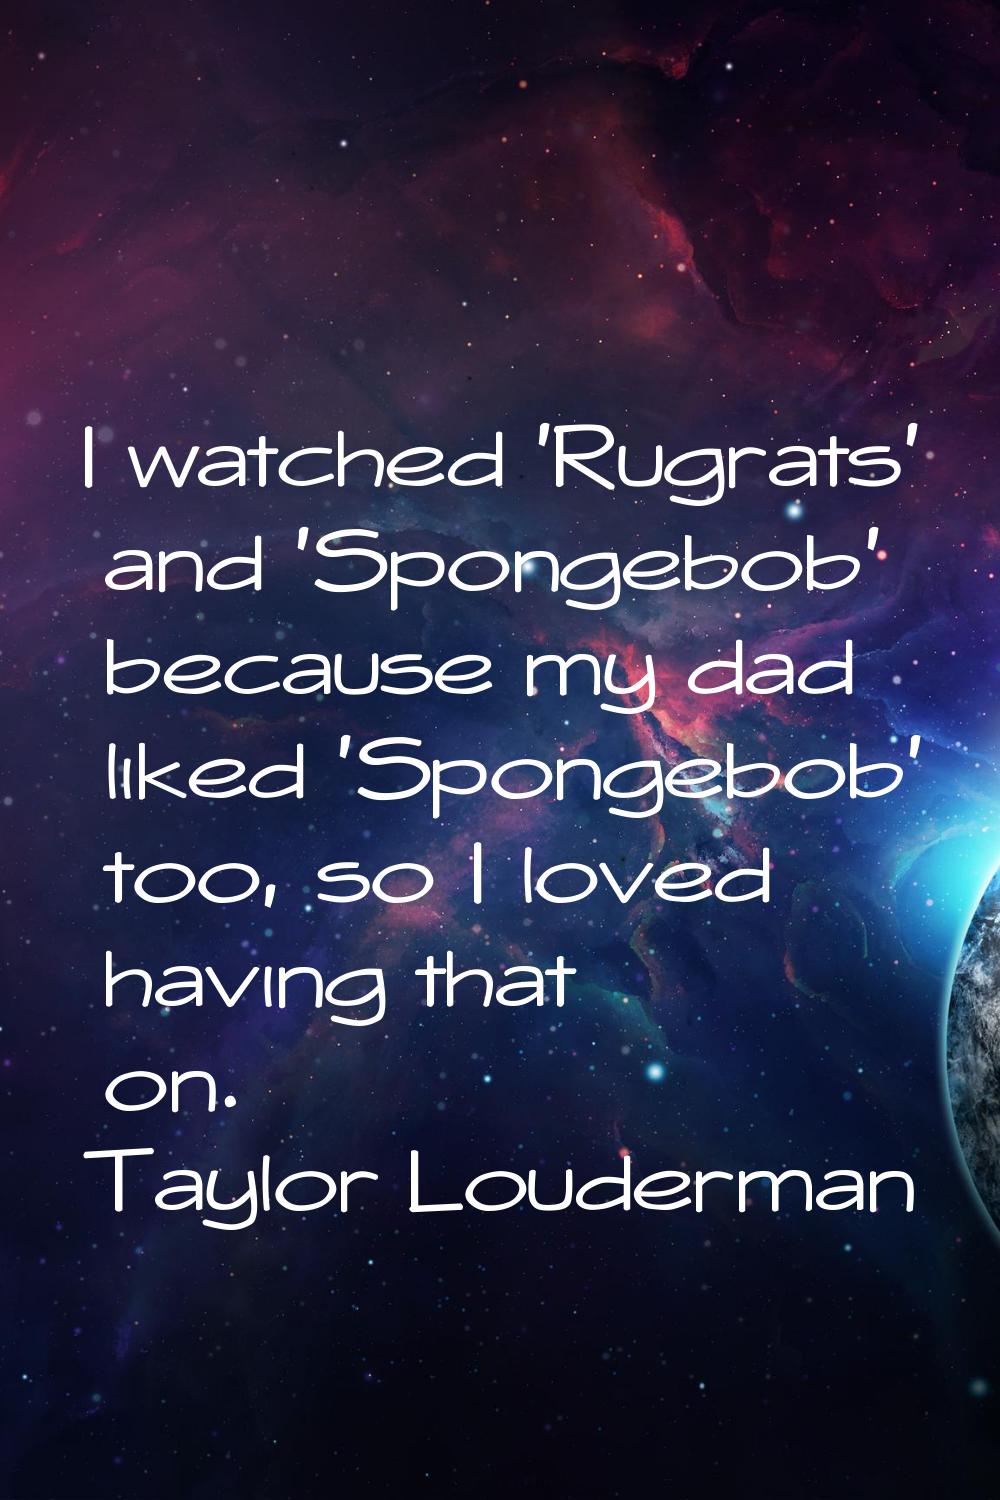 I watched 'Rugrats' and 'Spongebob' because my dad liked 'Spongebob' too, so I loved having that on